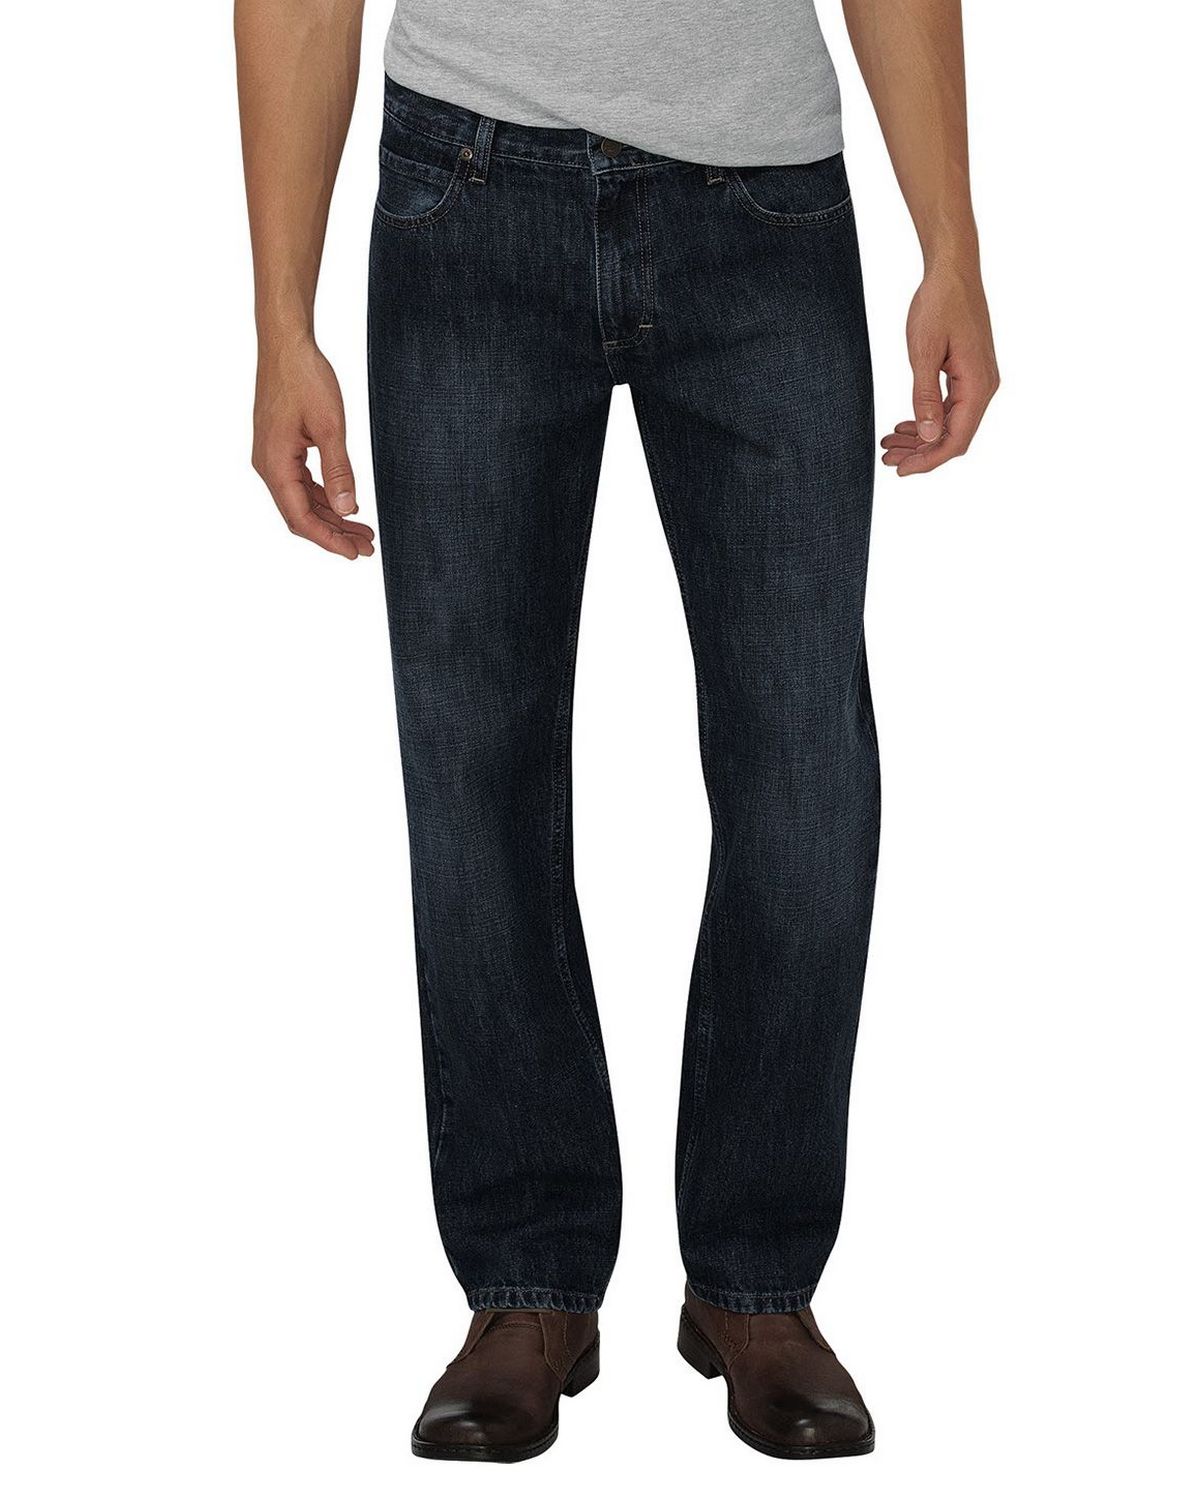 UPC 889440153558 product image for Dickies XD740 Mens X-Series Relaxed Fit Straight-Leg 5-Pocket Denim Jean Pant -  | upcitemdb.com